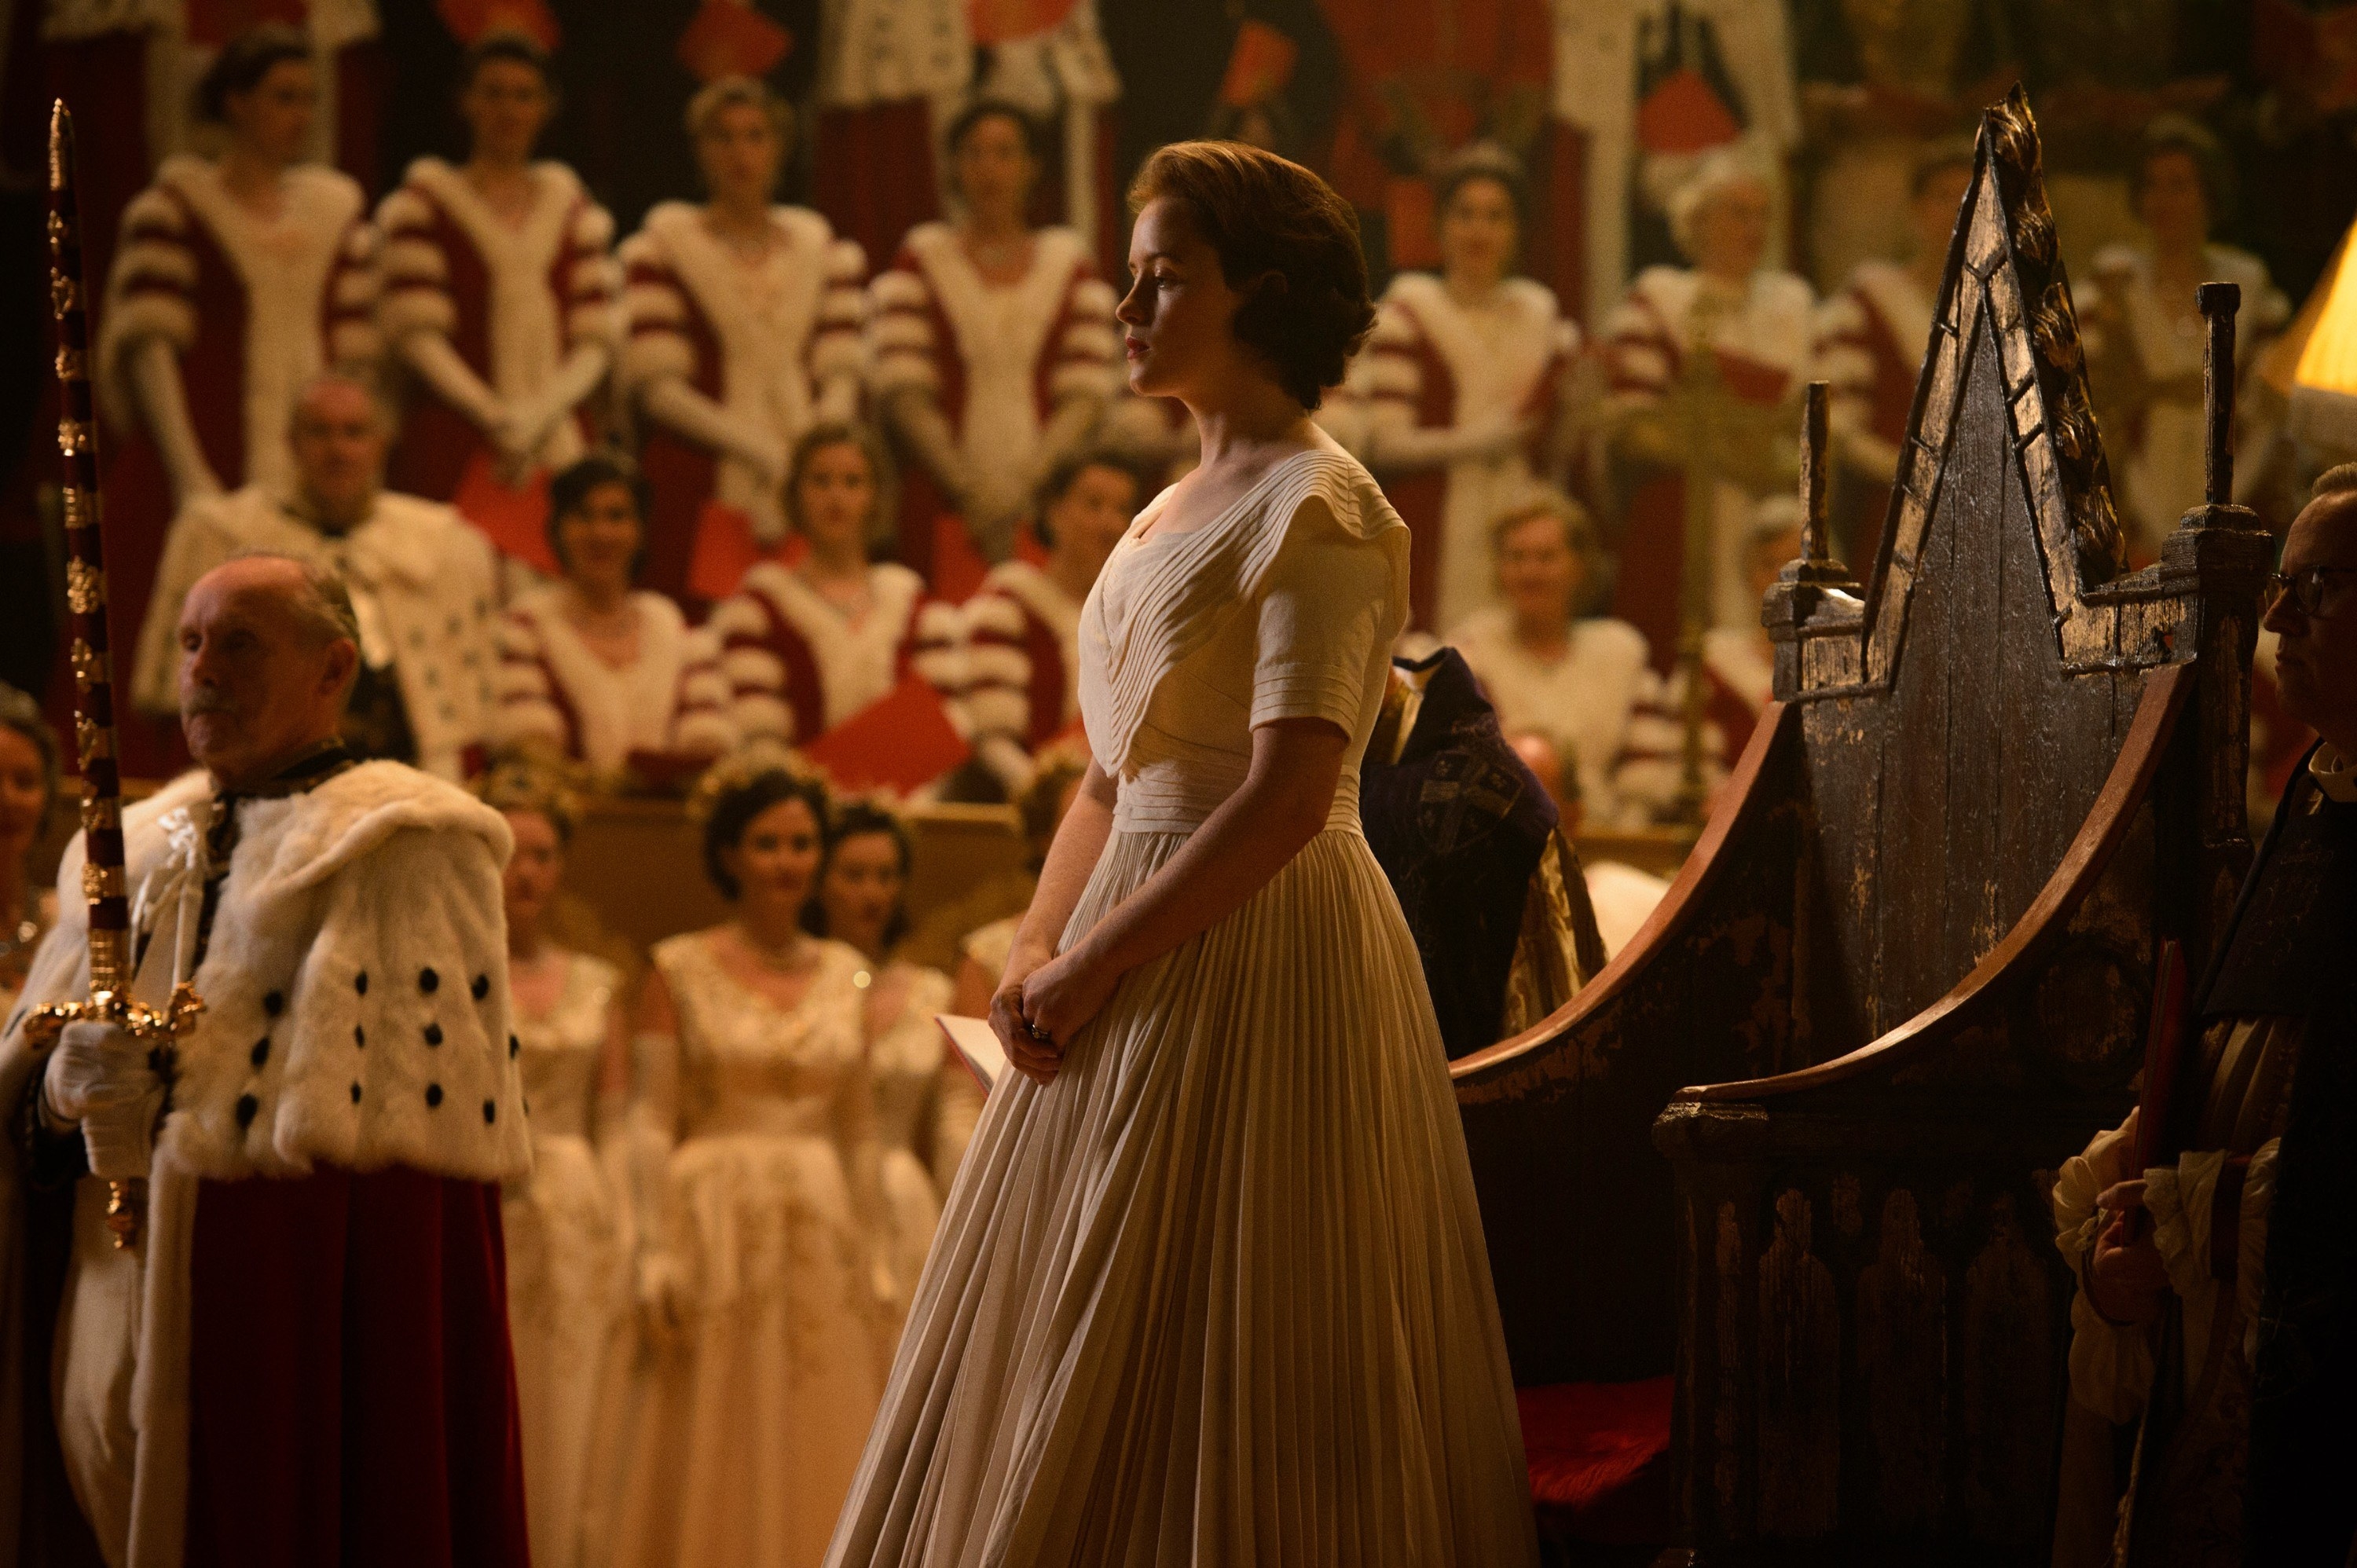 a simpler gown as the Queen gets anointed in &quot;The Crown&quot;